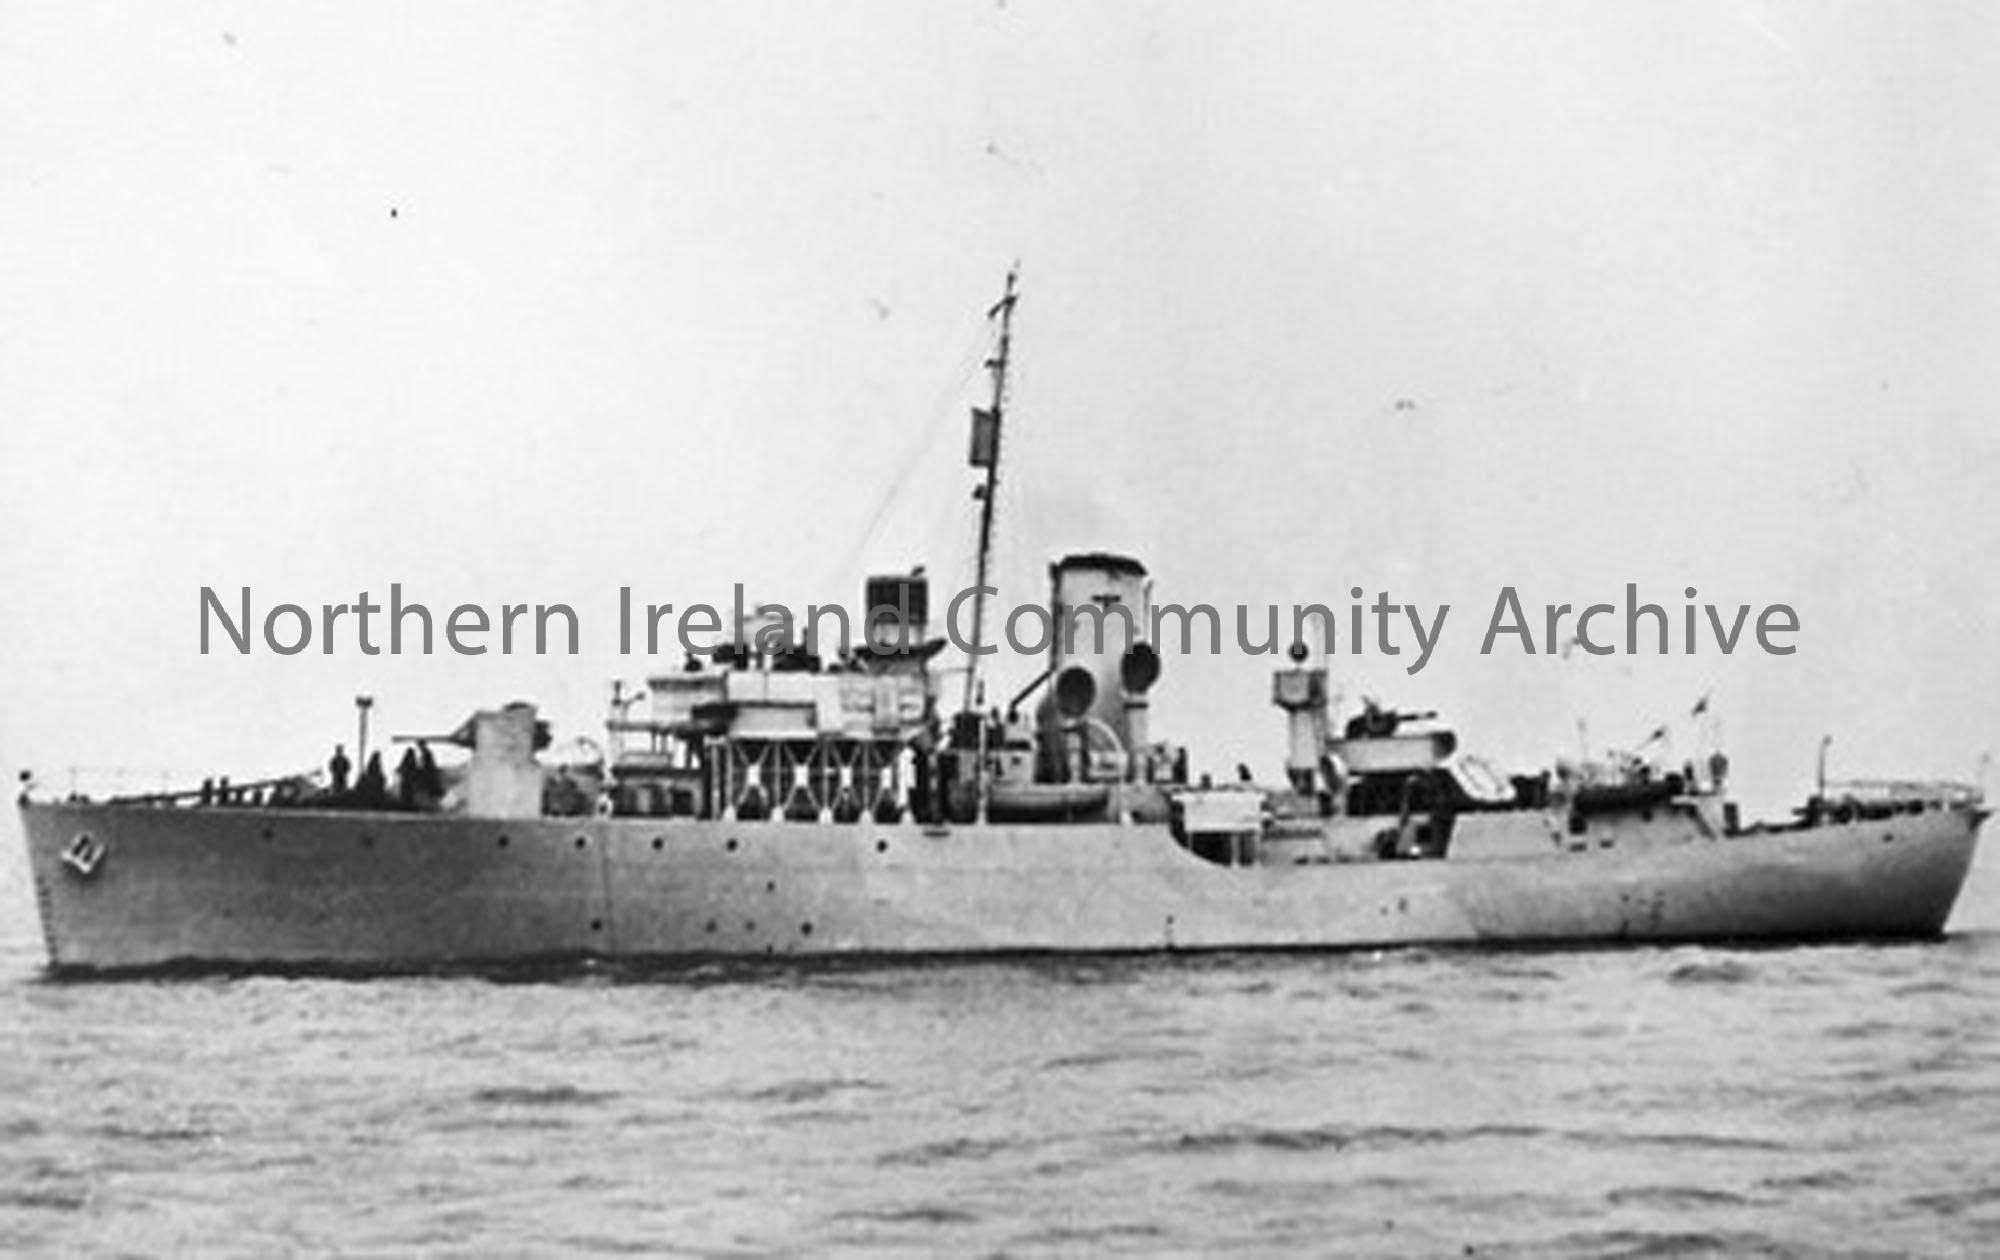 HMS Anchusa
K 186 
H&W ship number 1097
Launched: 15 Jan, 1941 
Commissioned: 1 Mar, 1941 
 (3056)